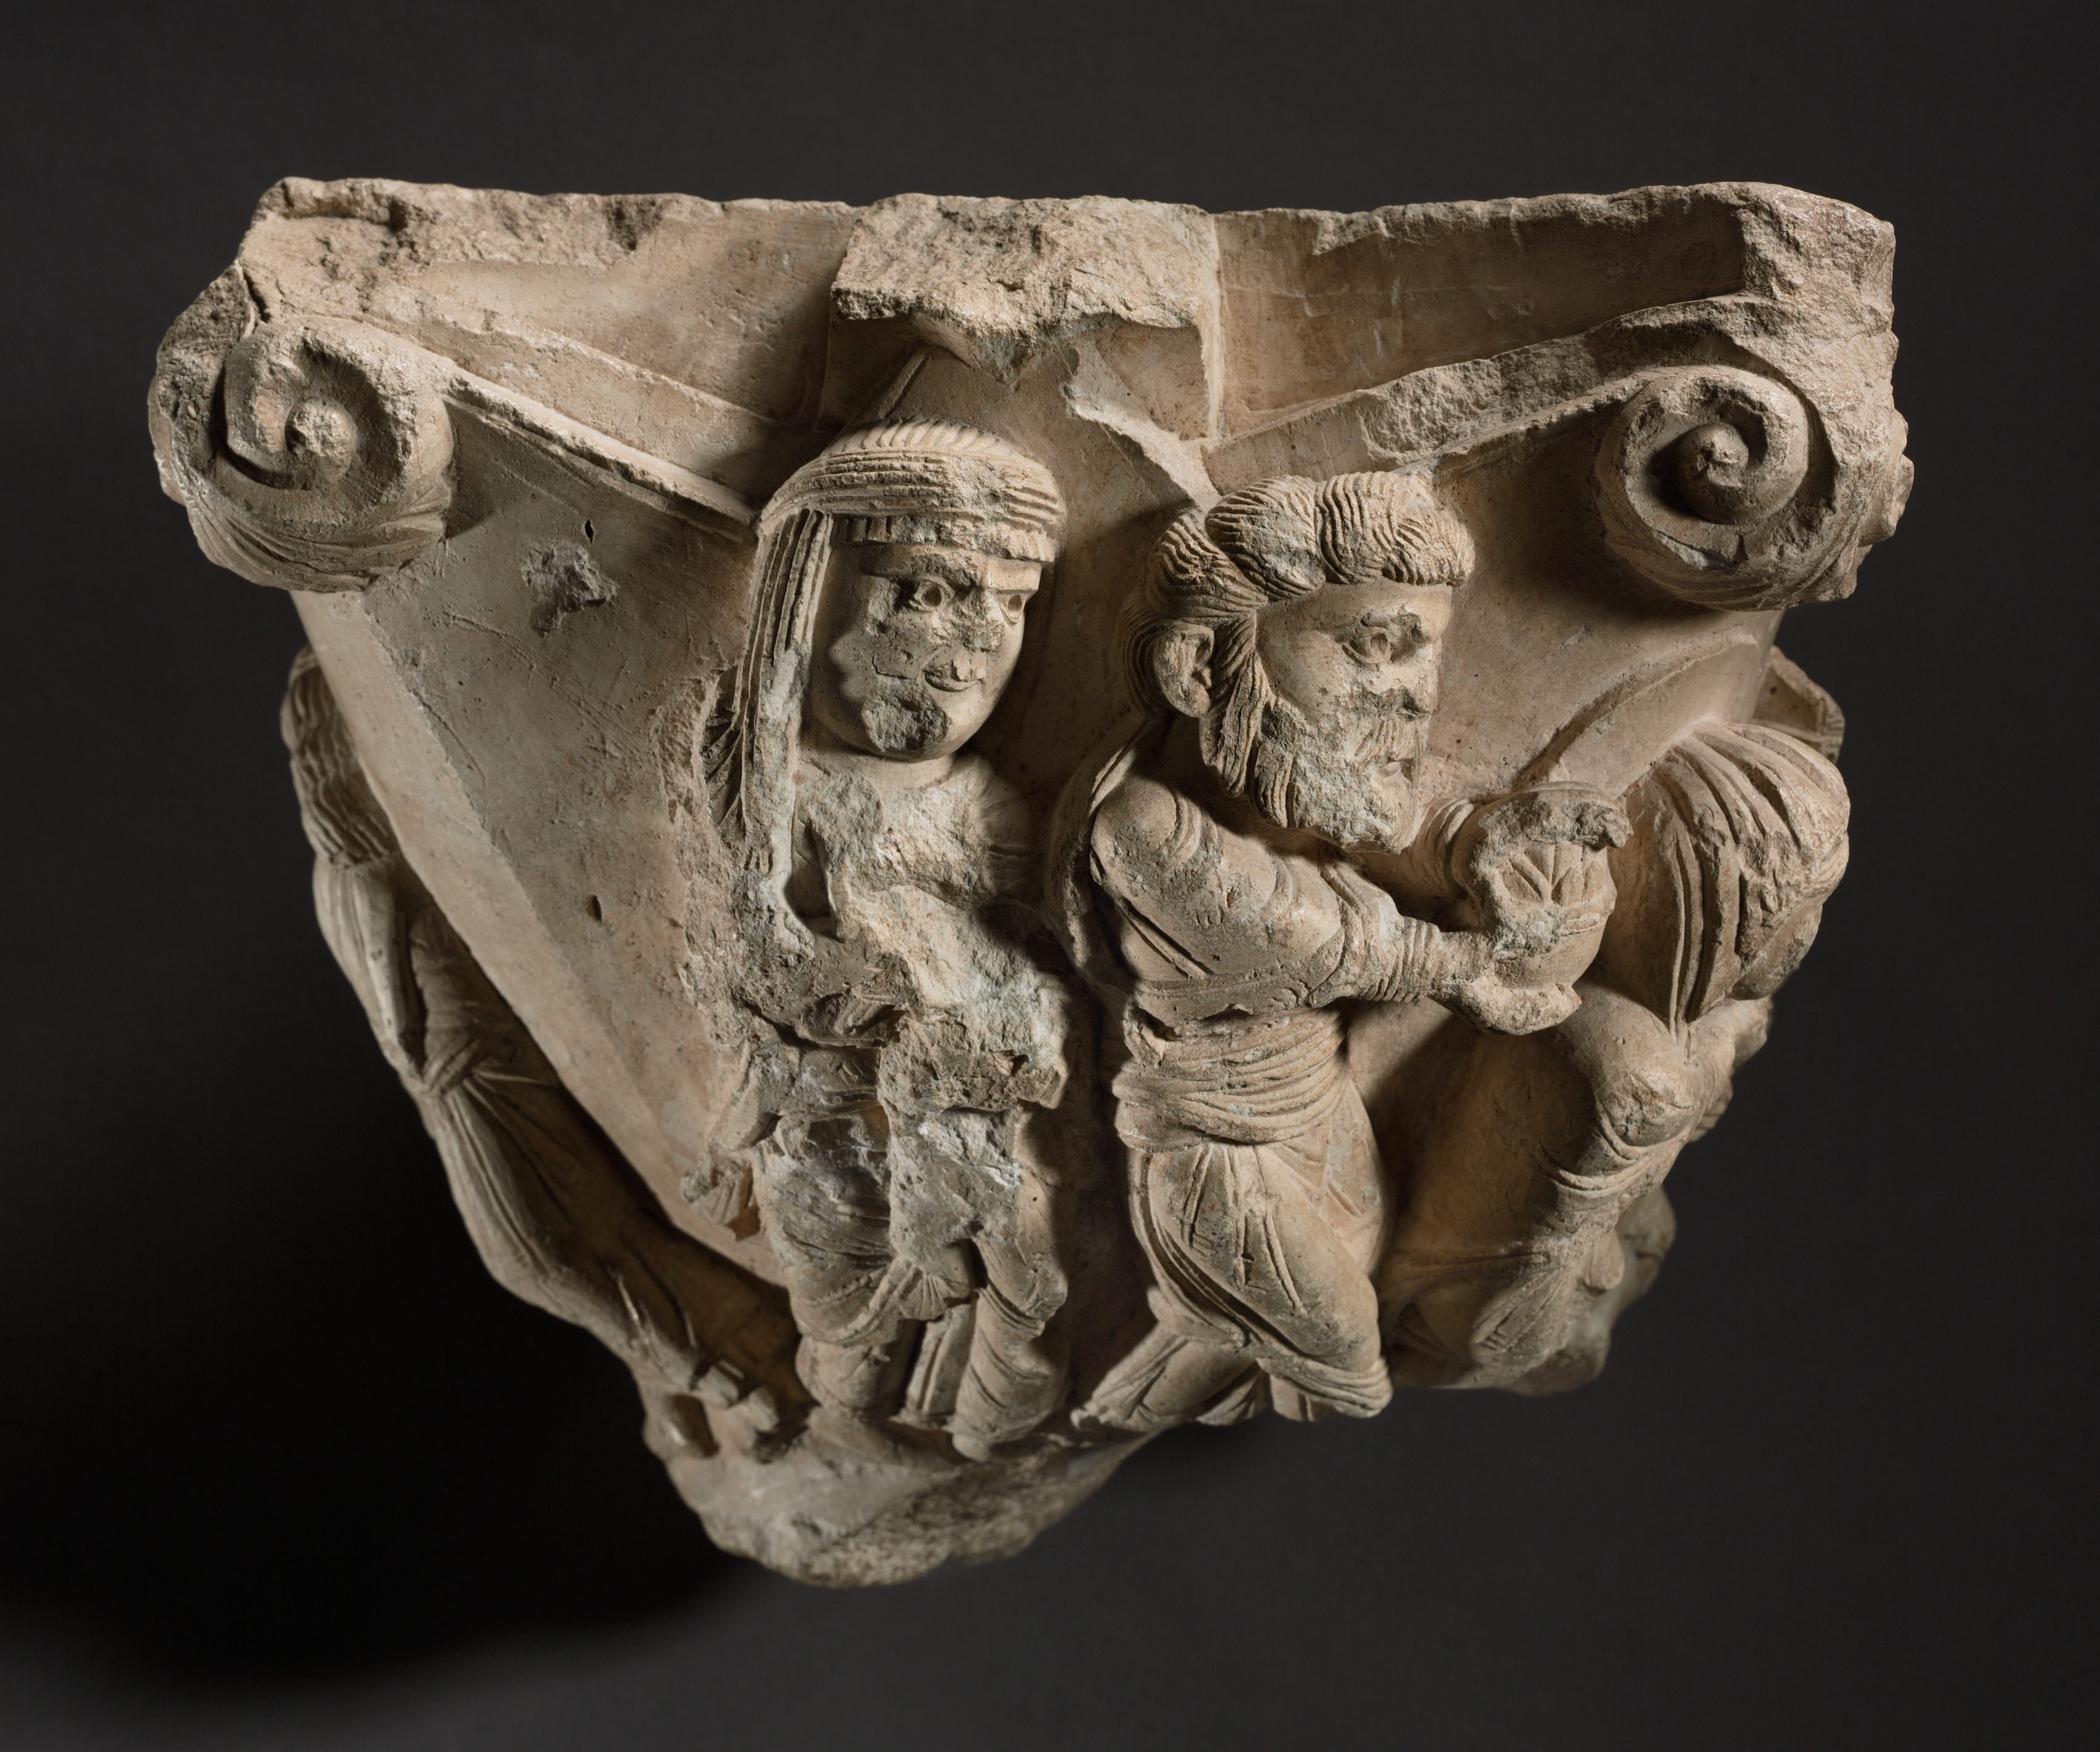 Fragment of a Capital with Scenes from Mary’s Infancy